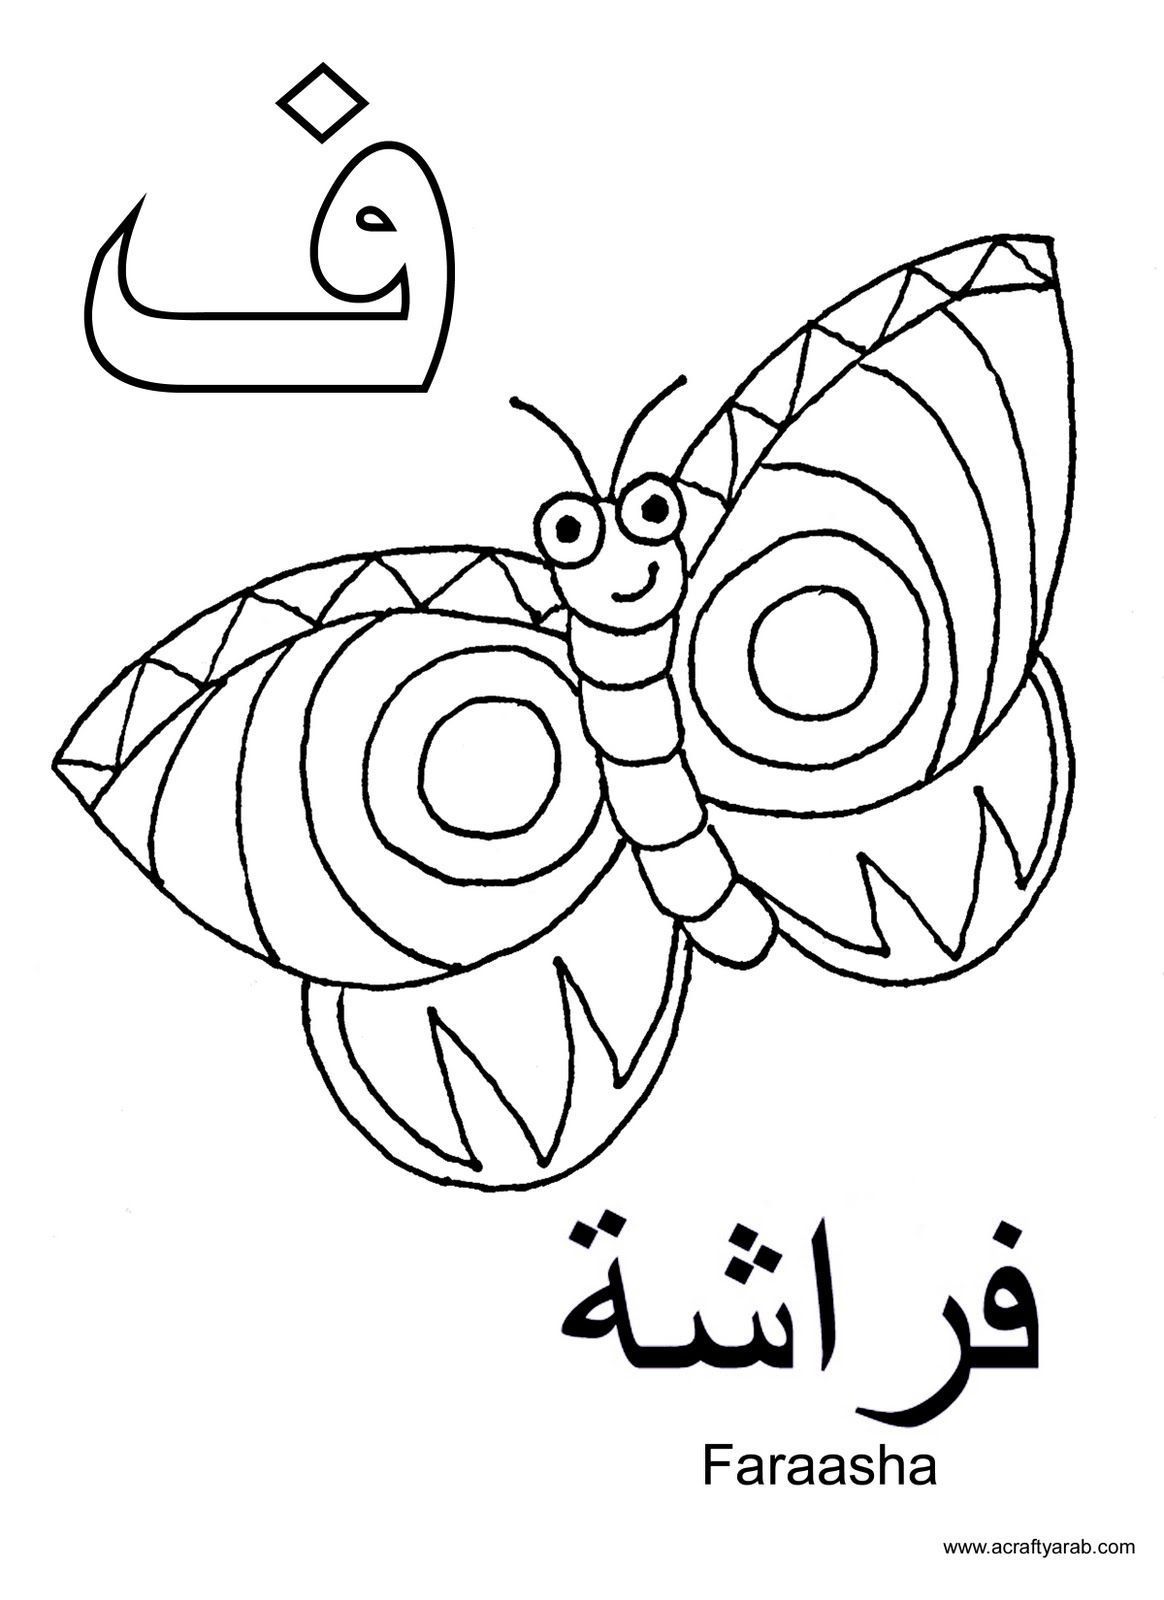 Arabic Alphabet Coloring Pages at GetDrawings  Free download